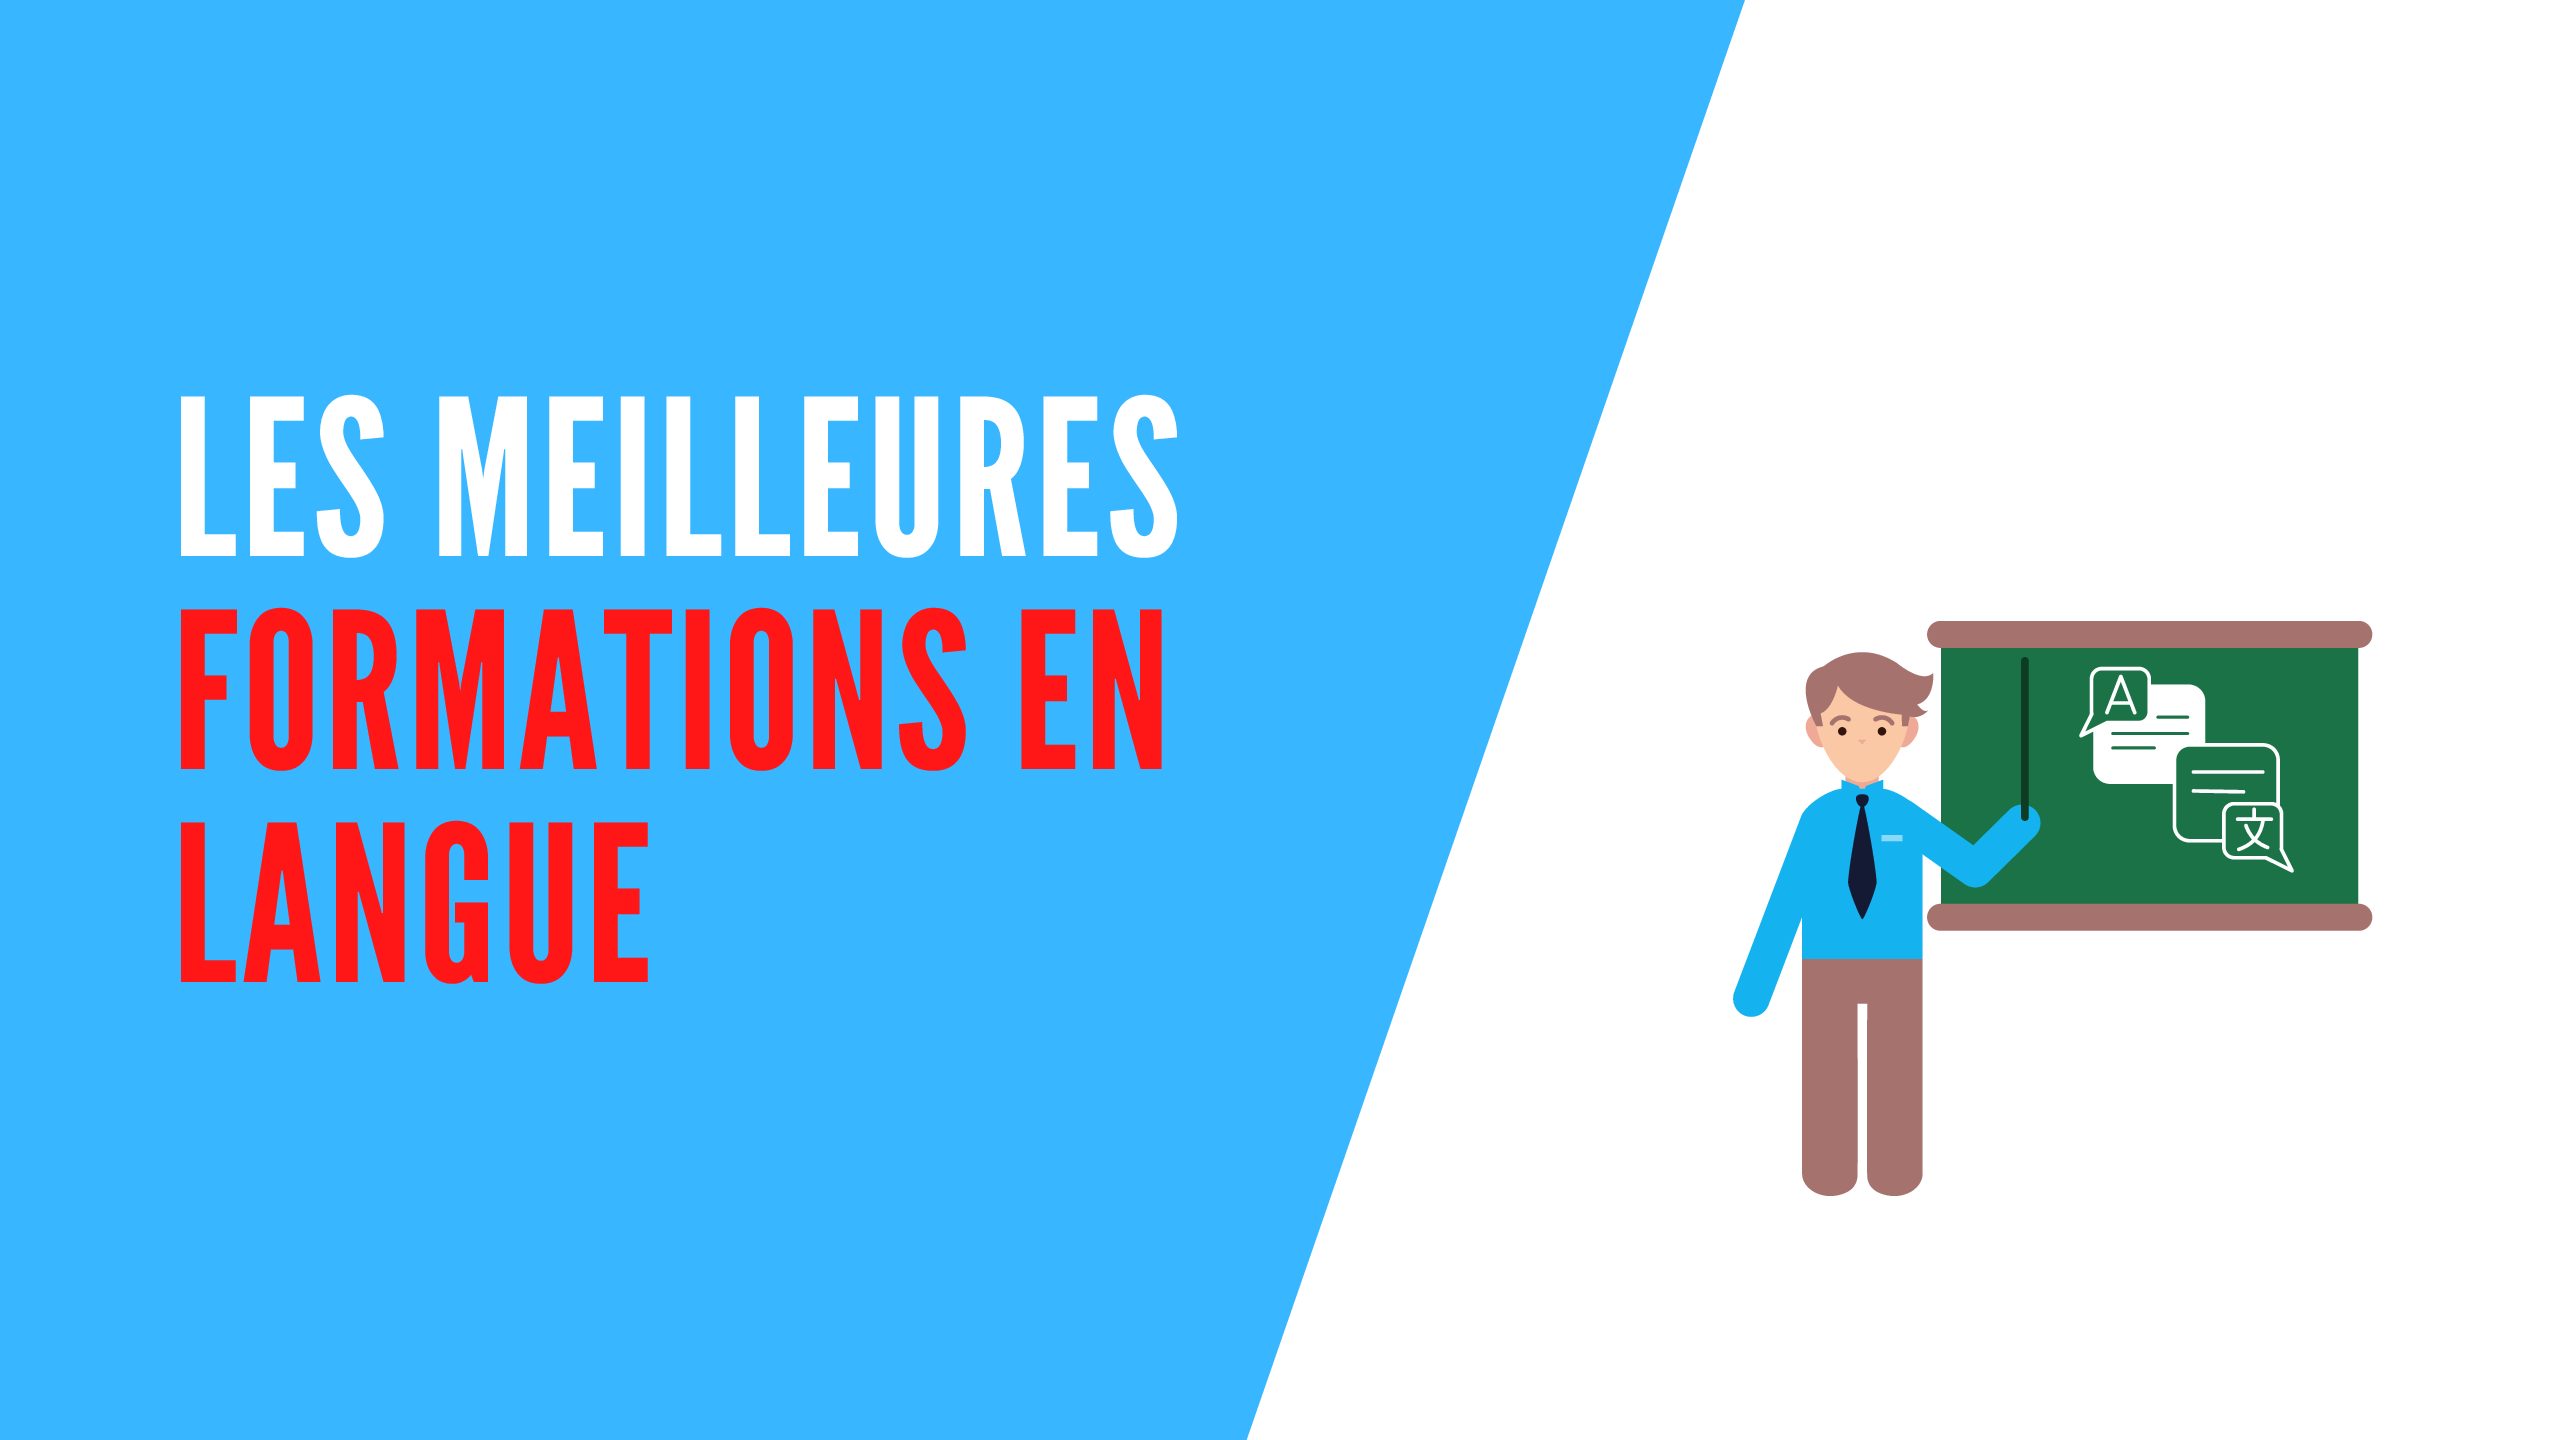 You are currently viewing Les meilleures formations en langue